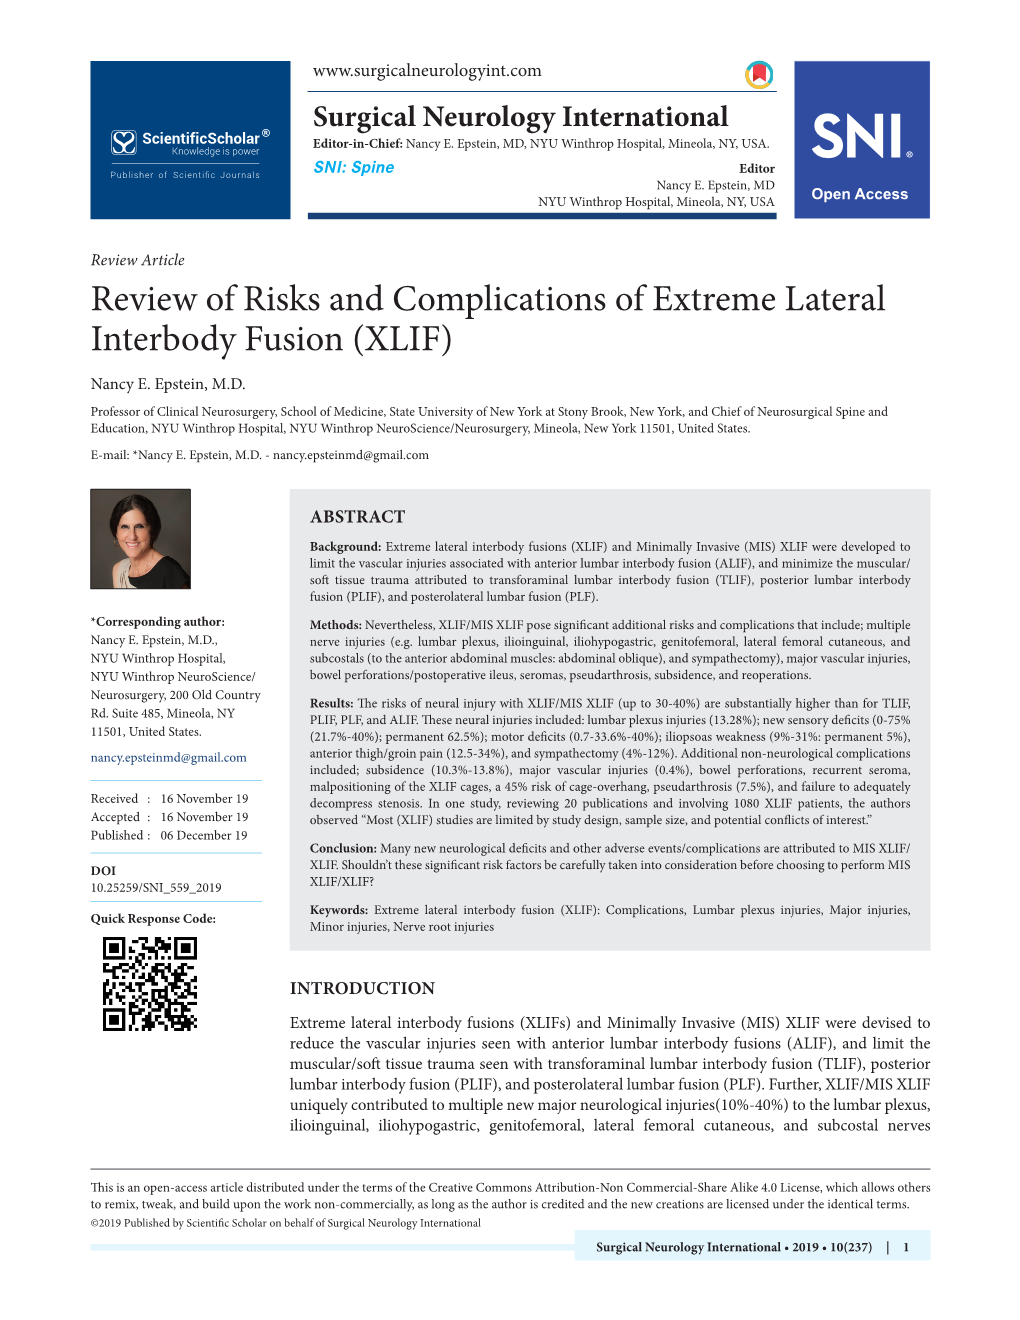 Review of Risks and Complications of Extreme Lateral Interbody Fusion (XLIF) Nancy E